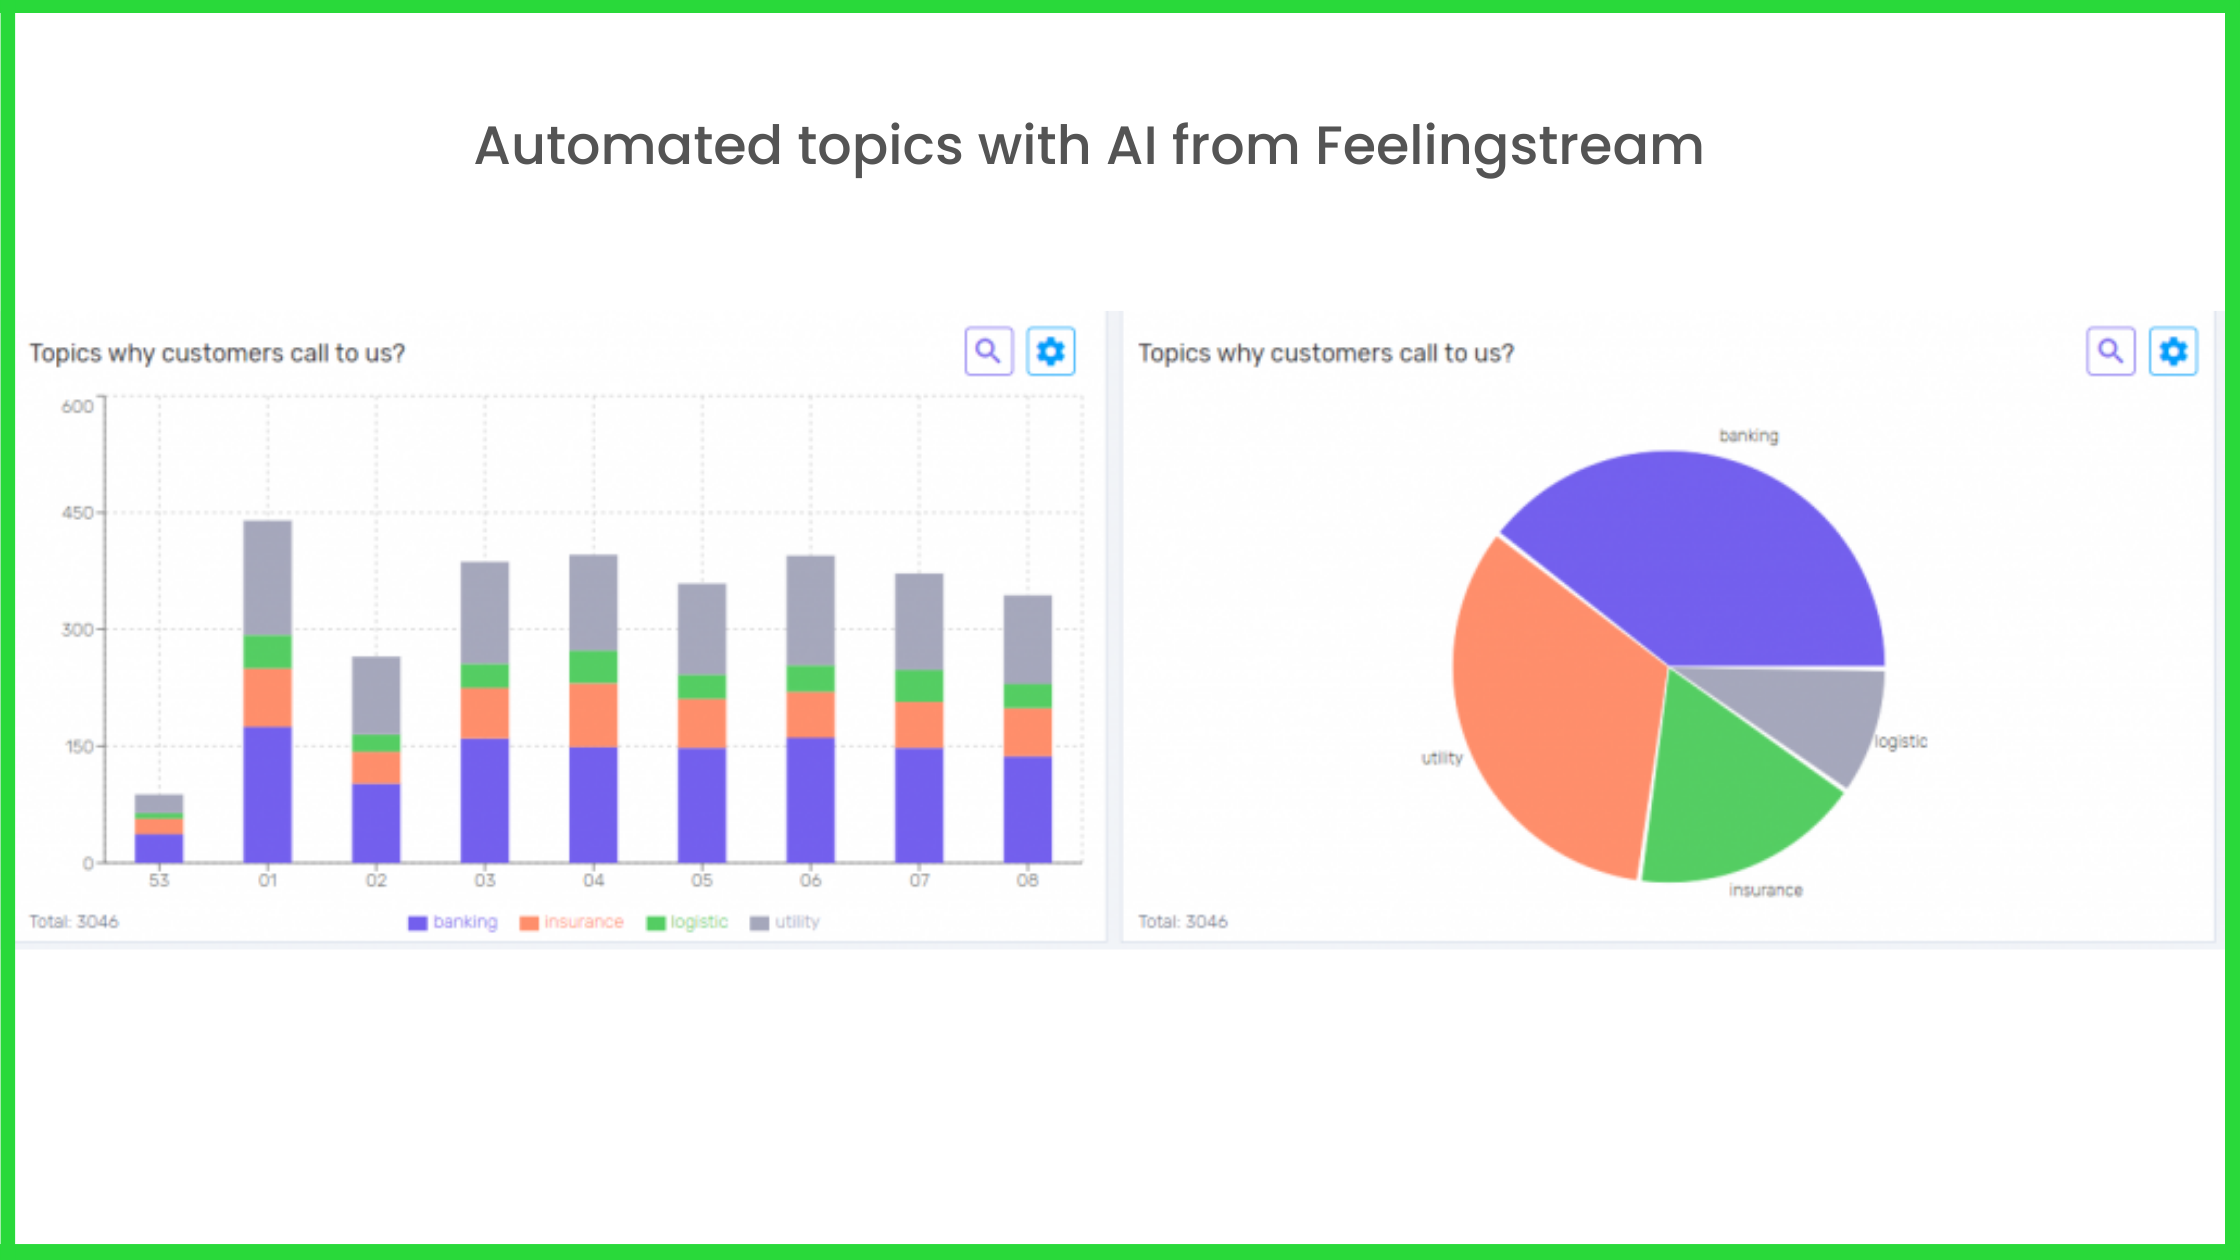 Automated topics with AI from Feelingstream